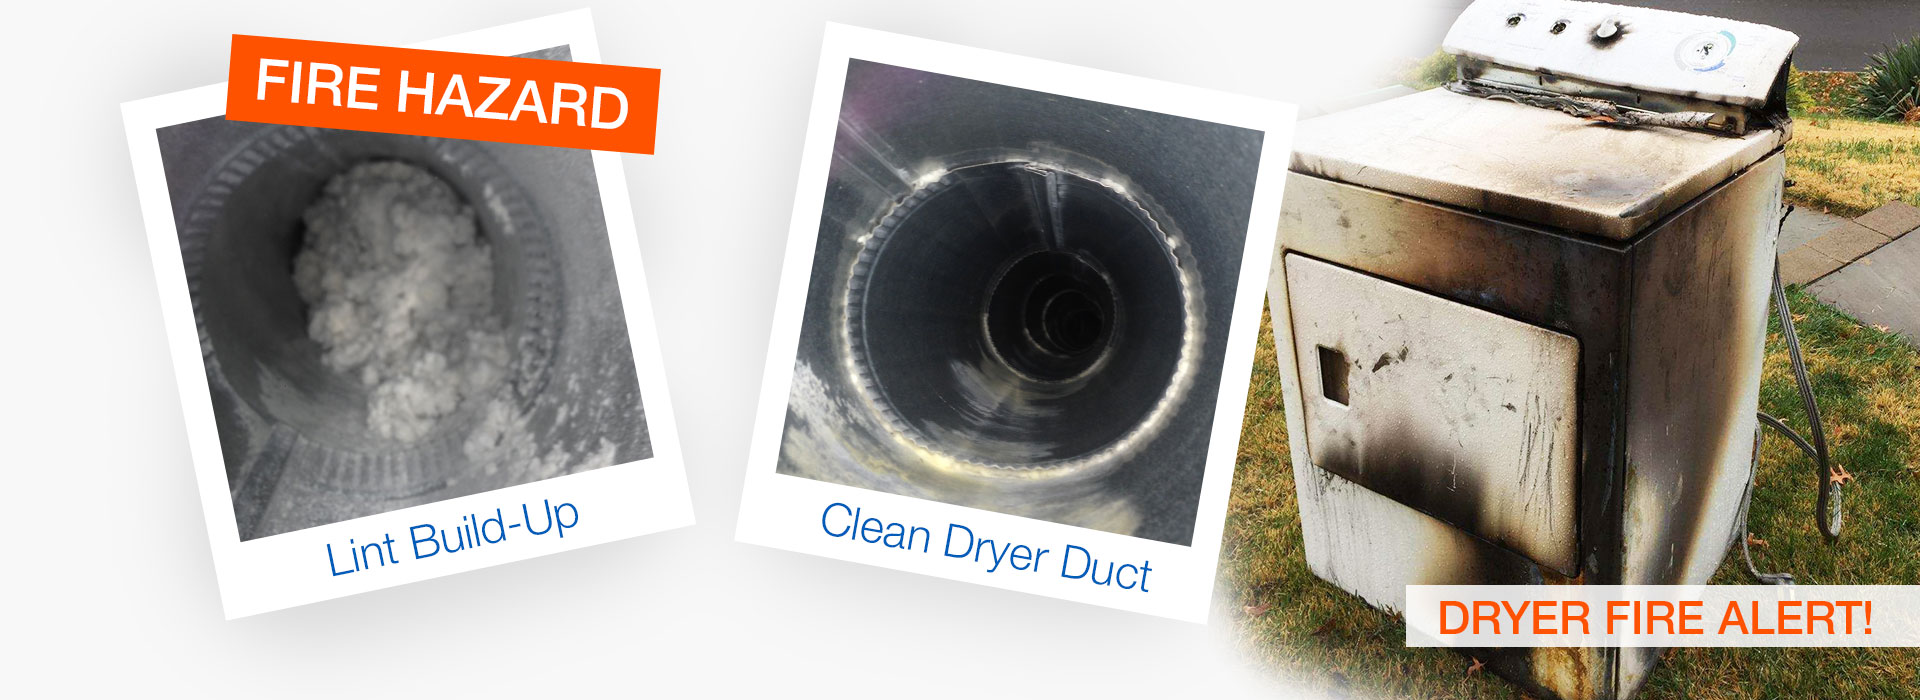 BETTER AIR - DRYER VENT CLEANING SERVICES